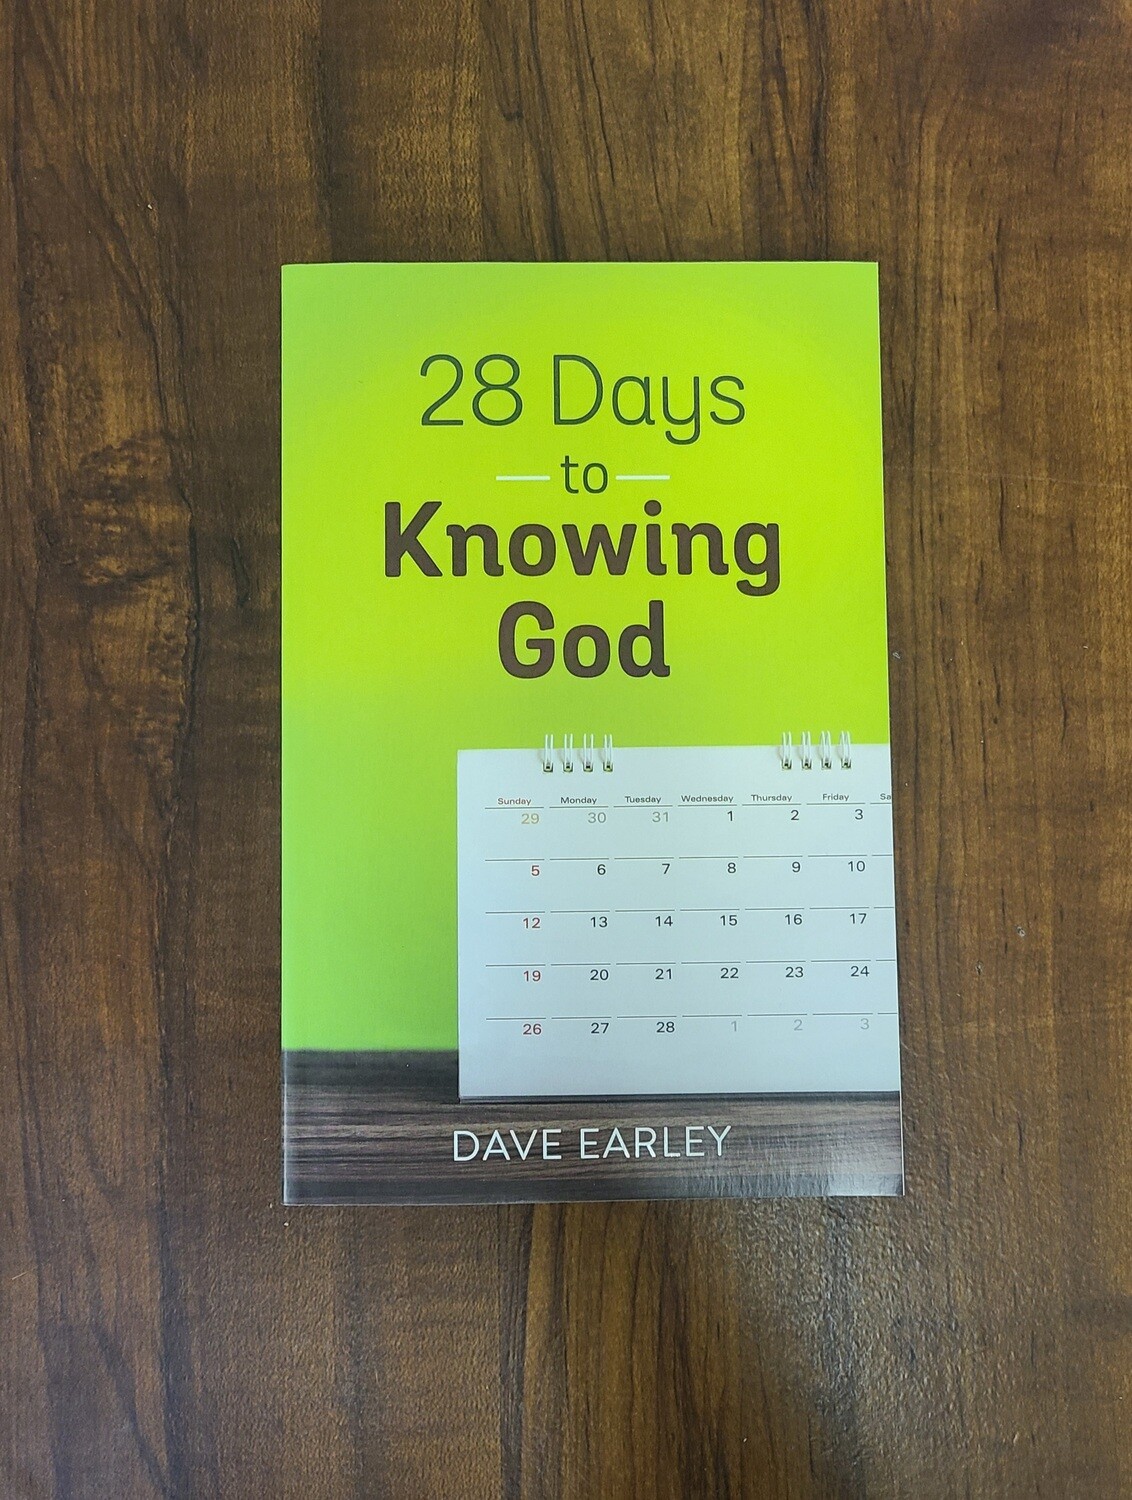 28 Days to Knowing God by Dave Earley